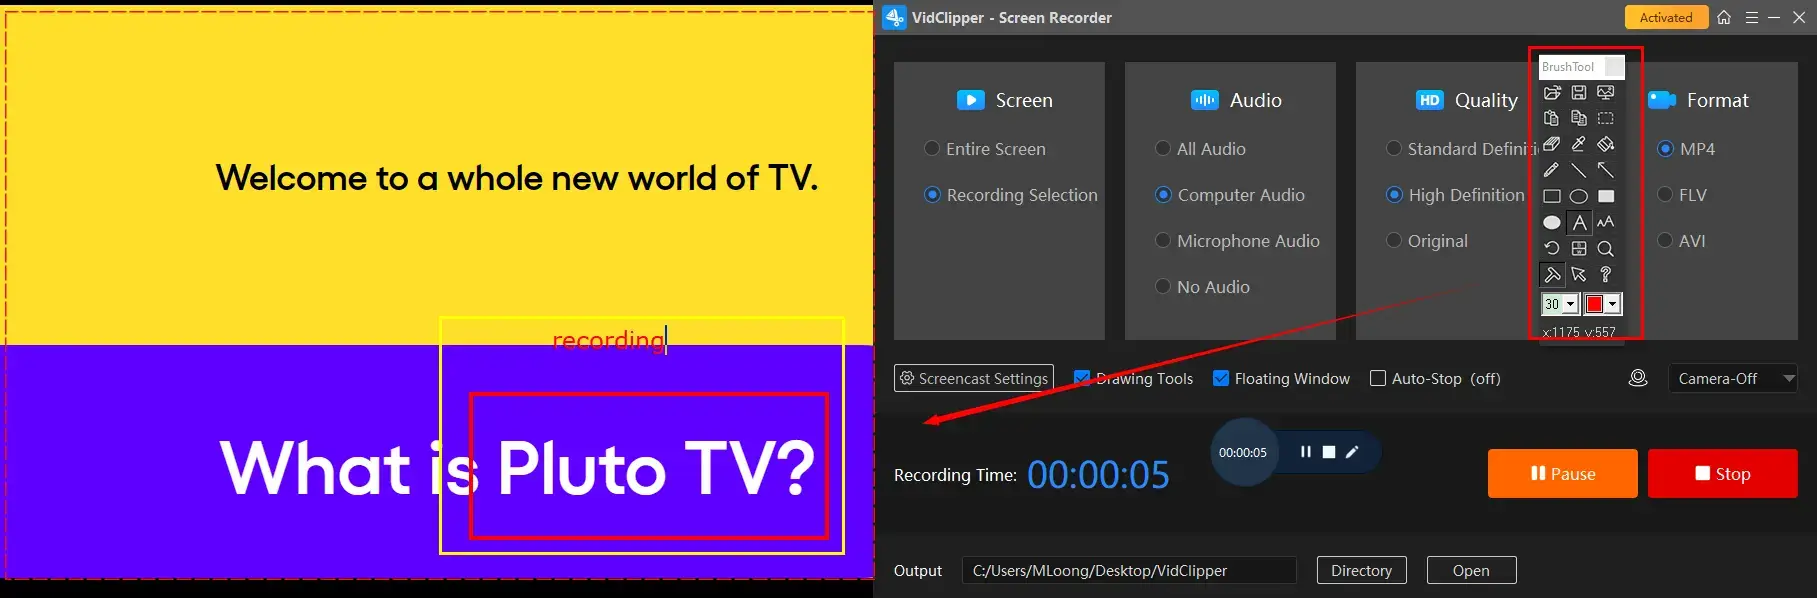 how to record pluto tv on windows with workintool capture screen recorder drawing toolbar